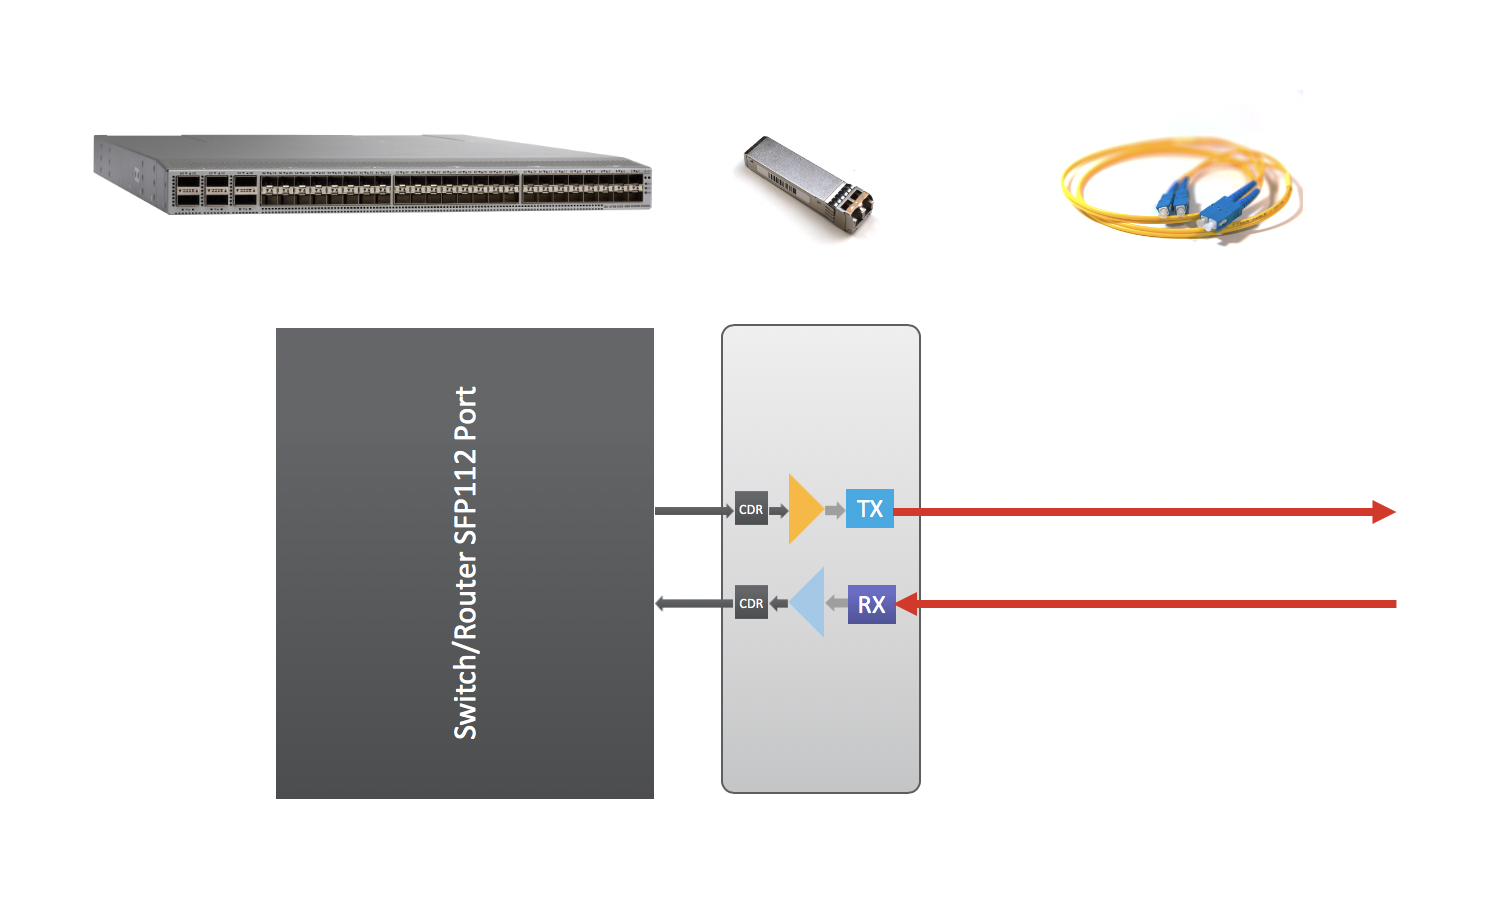 Figure 3. Block diagram and application of a future 100G SFP pluggable transceiver module.